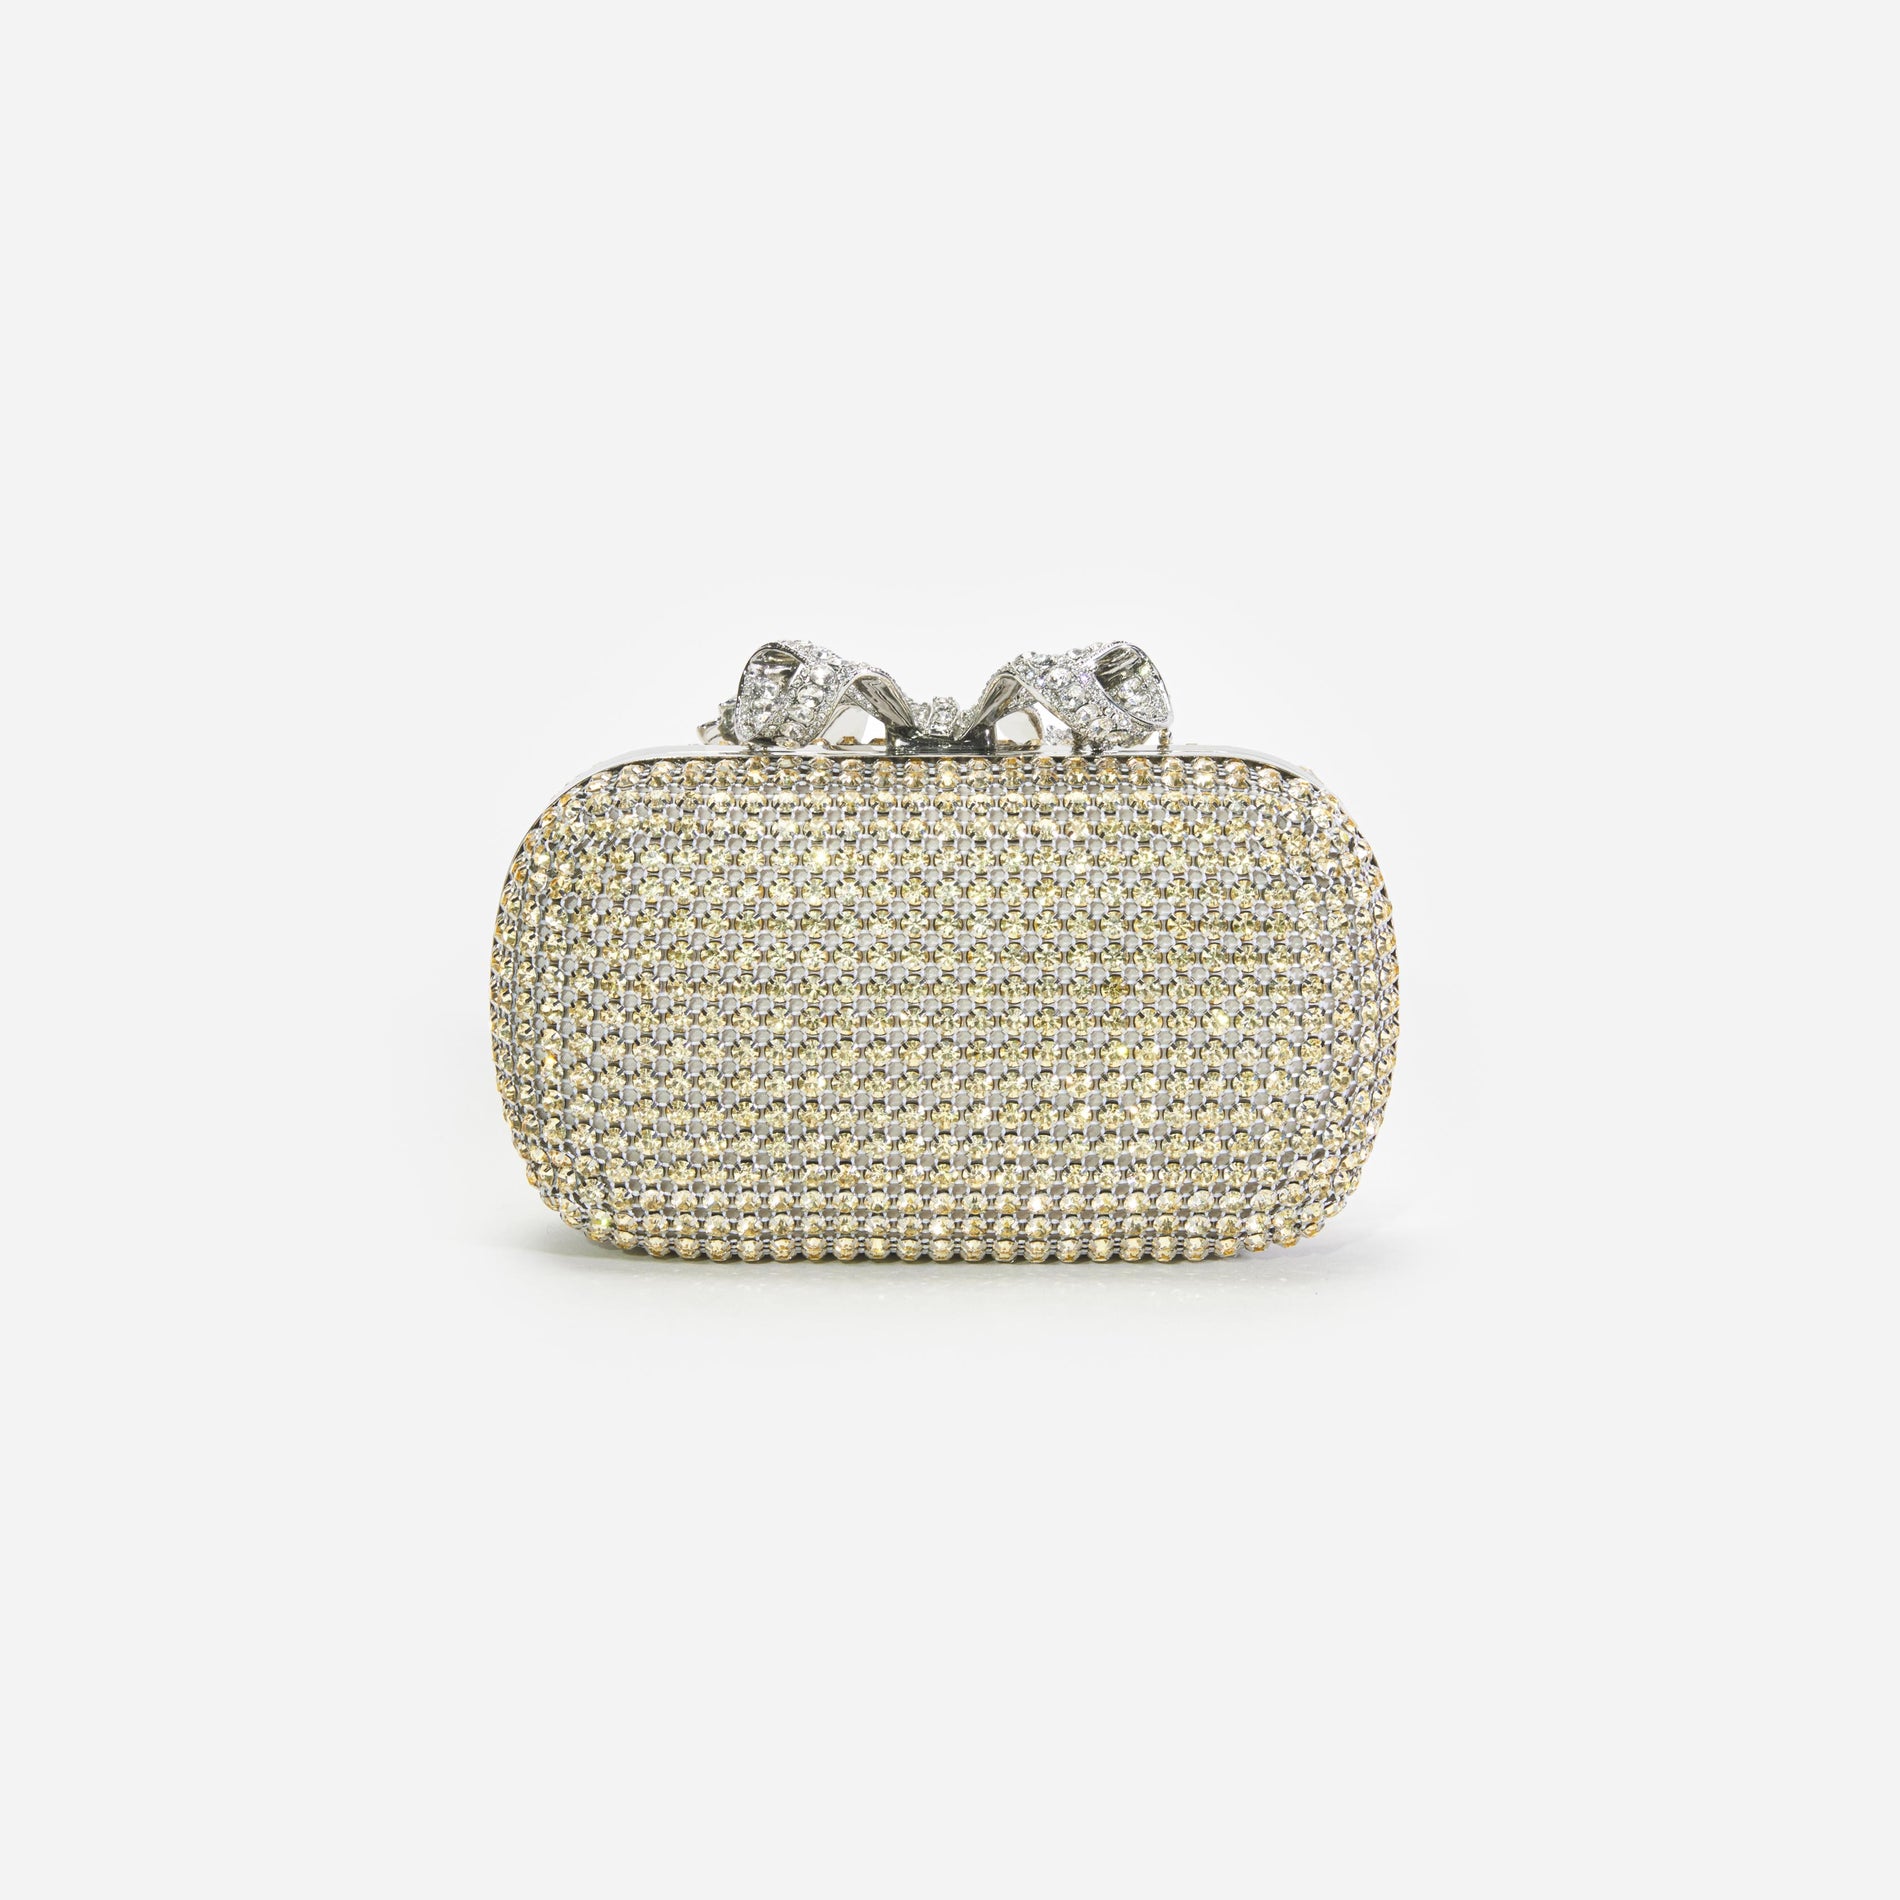 Champagne Chainmail Clutch Bag